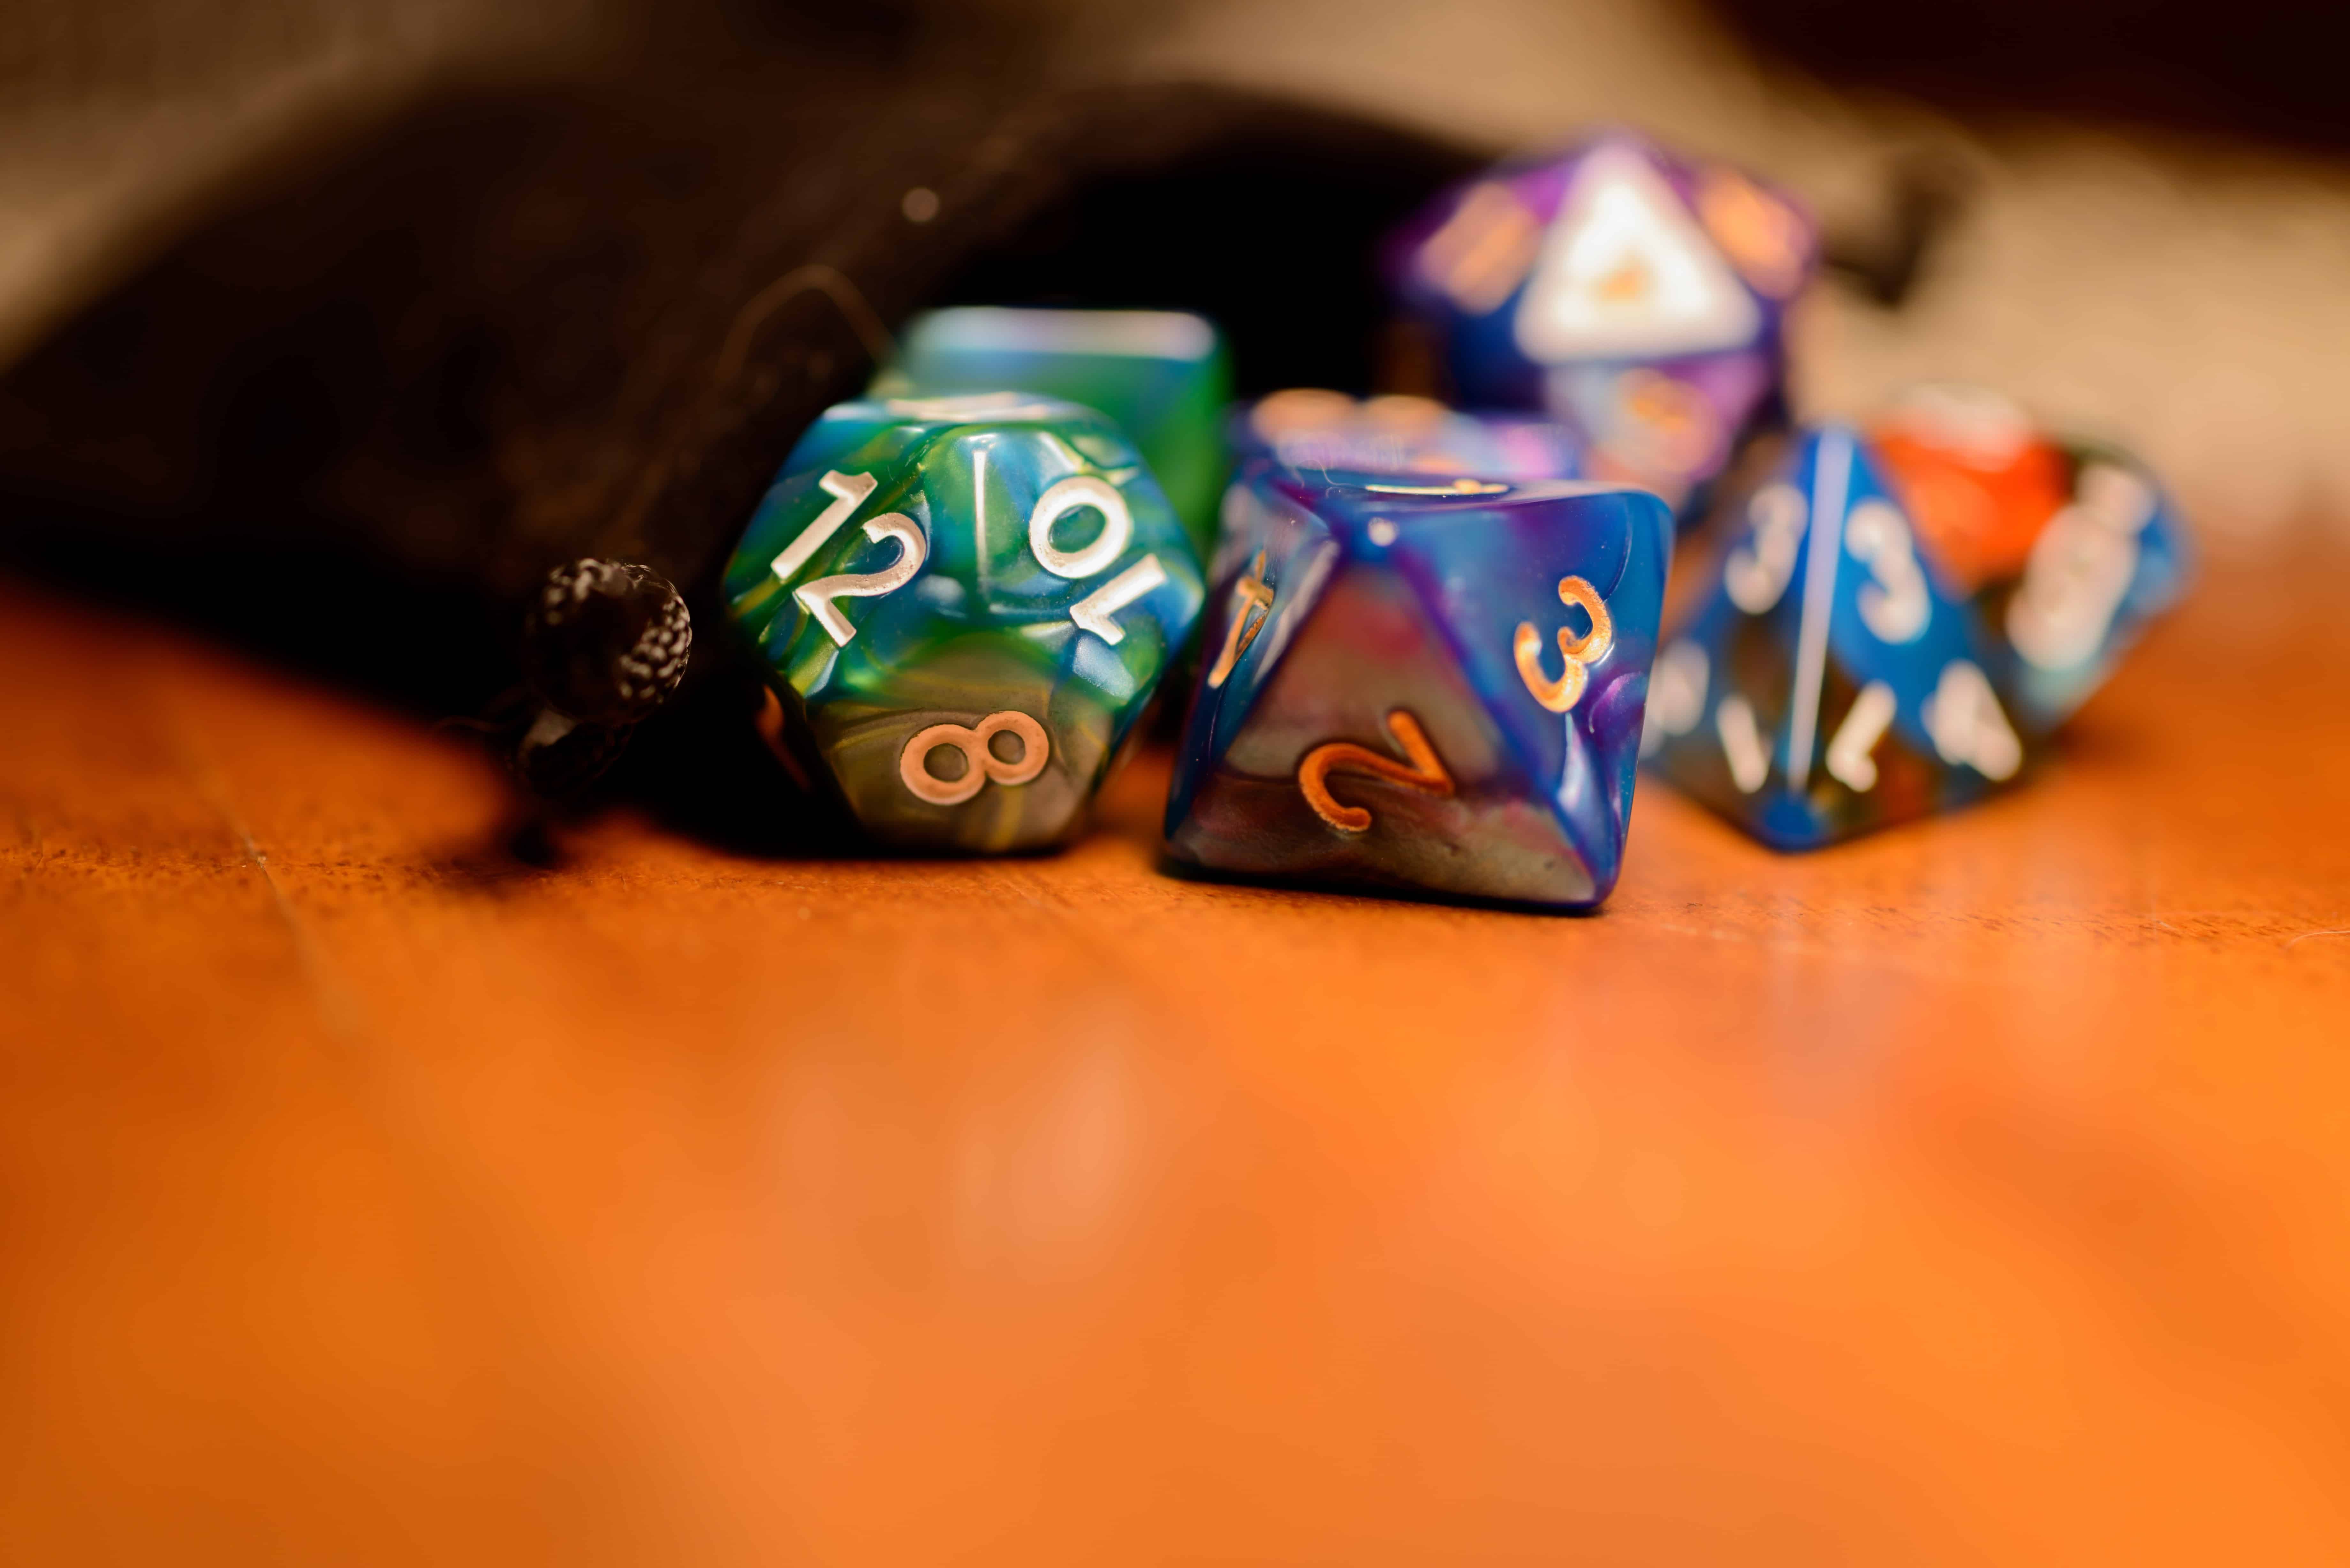 Role playing game dice